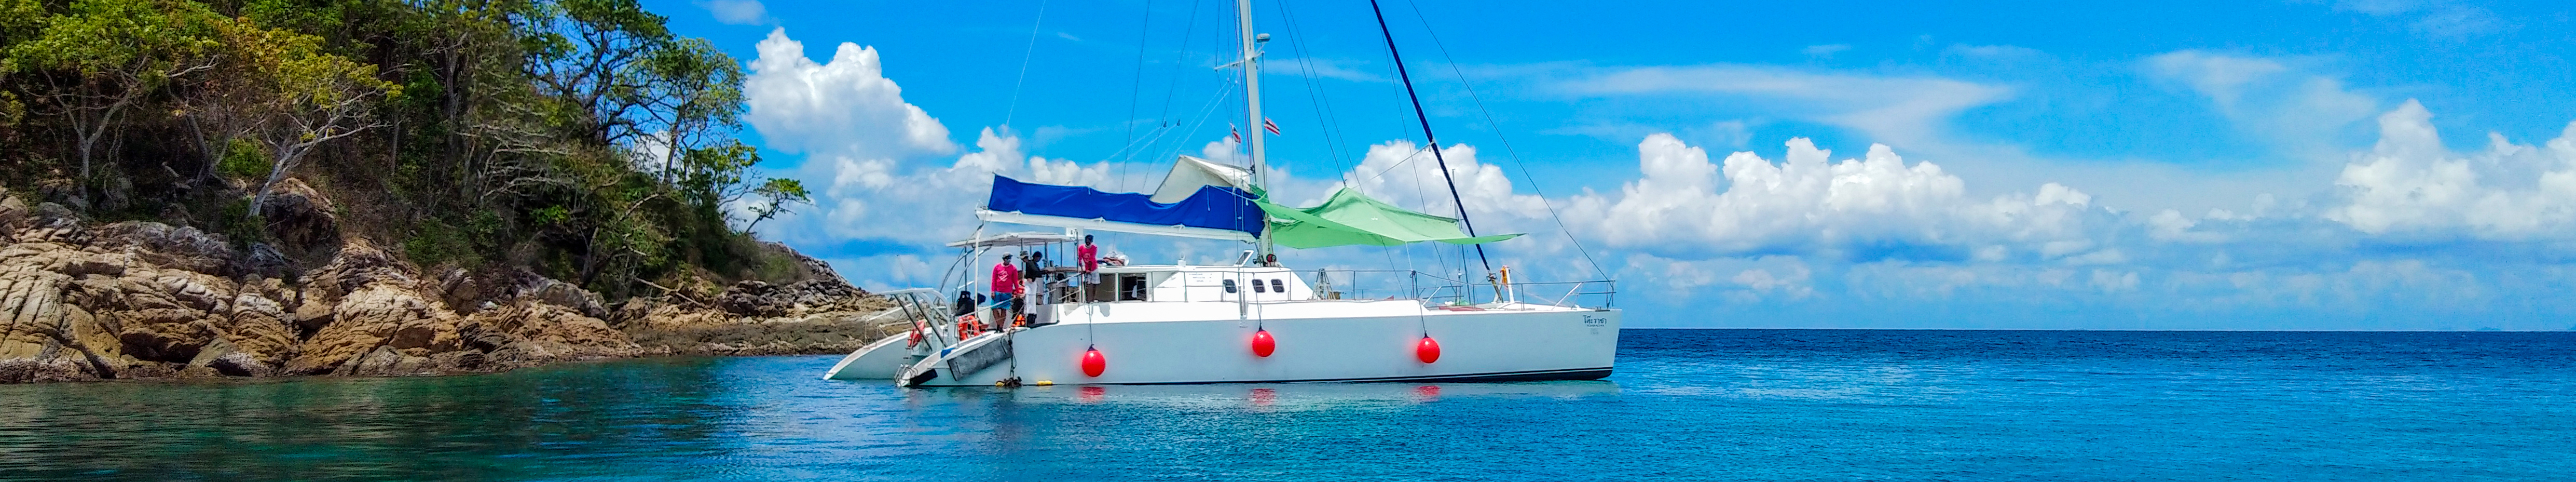 One Day Join Trip in Phuket by Sailing Yacht 2021 - Ticket2Attraction